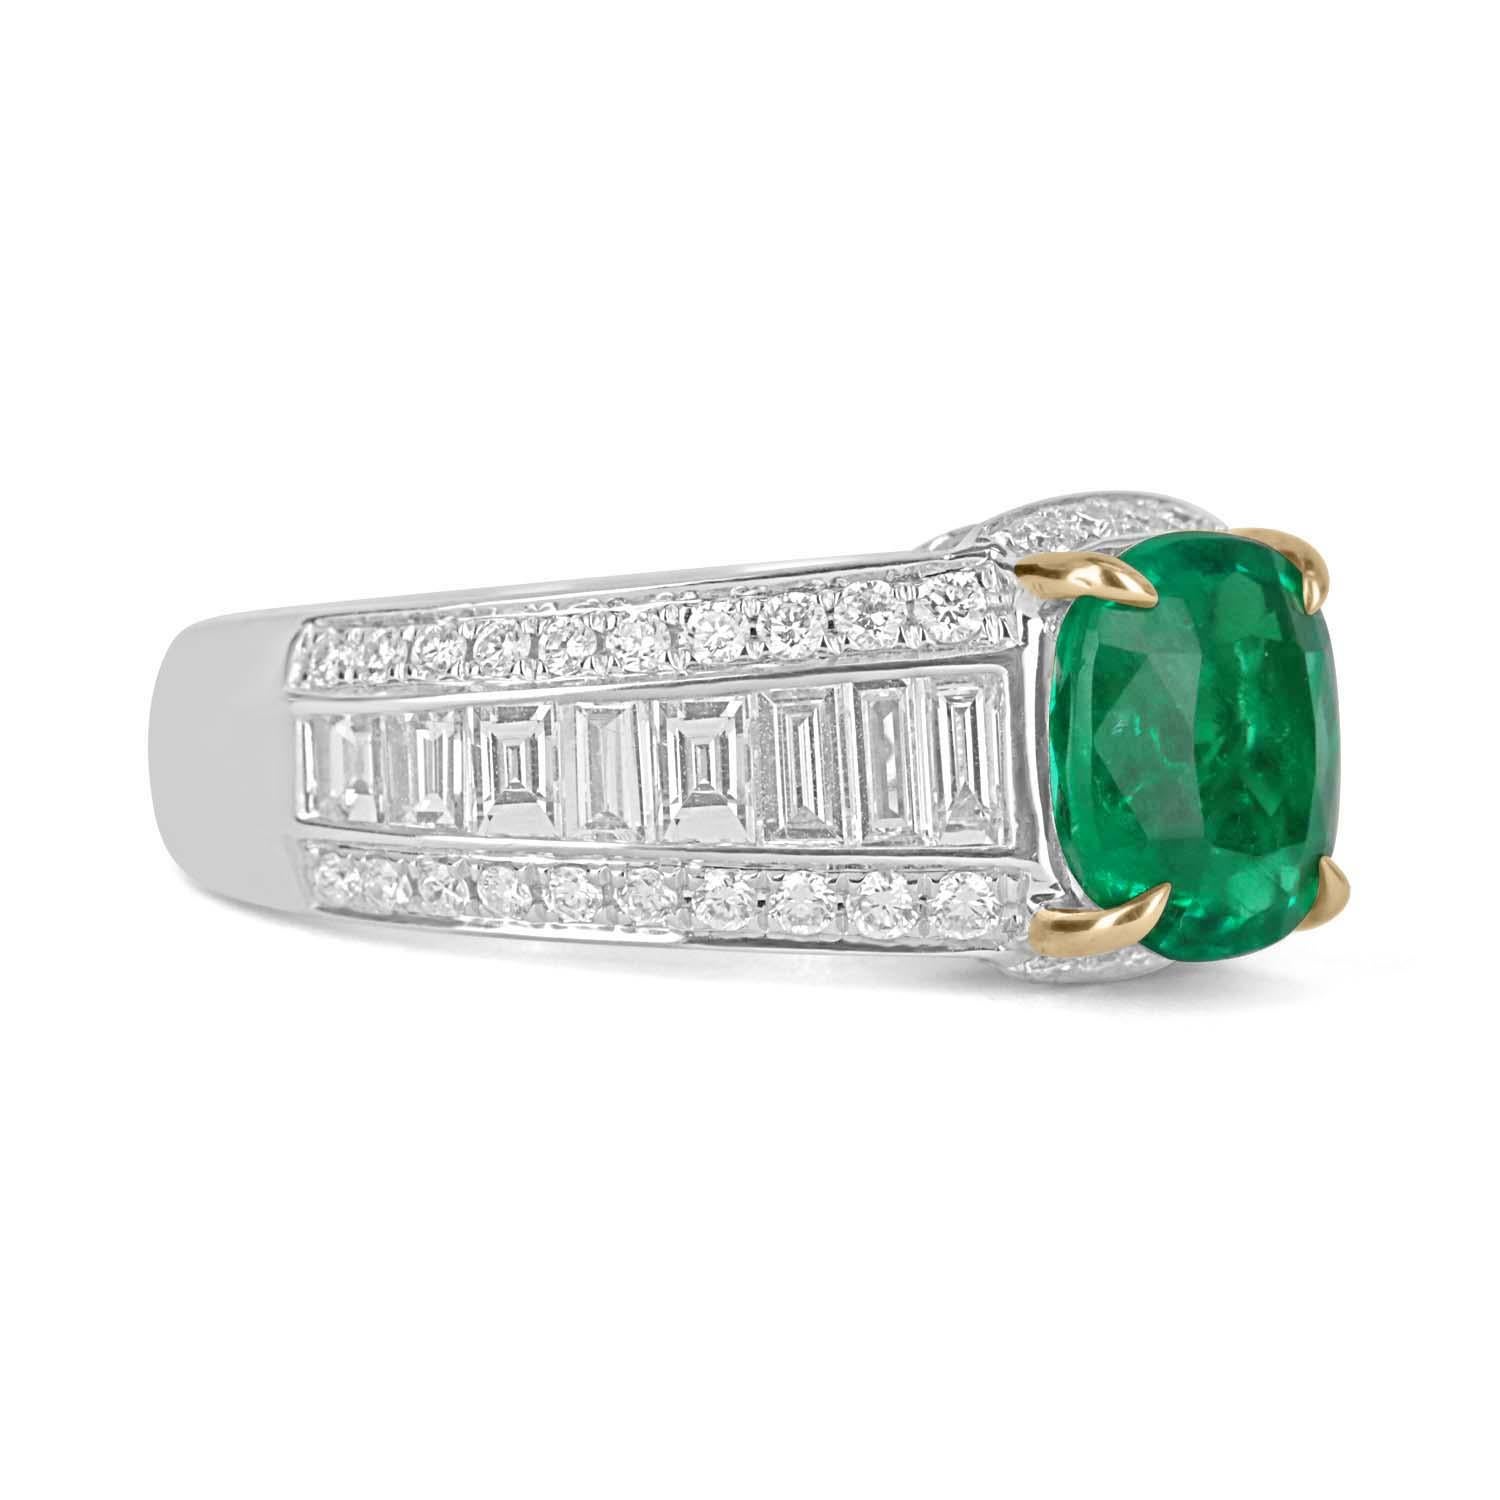 An exceptional Colombian emerald & diamond statement/anniversary ring. This fine-quality ring is captivating from every angle. Incredible diamonds highlight the emerald, shank, and gallery of the ring. The emerald has vivid, vivacious green color